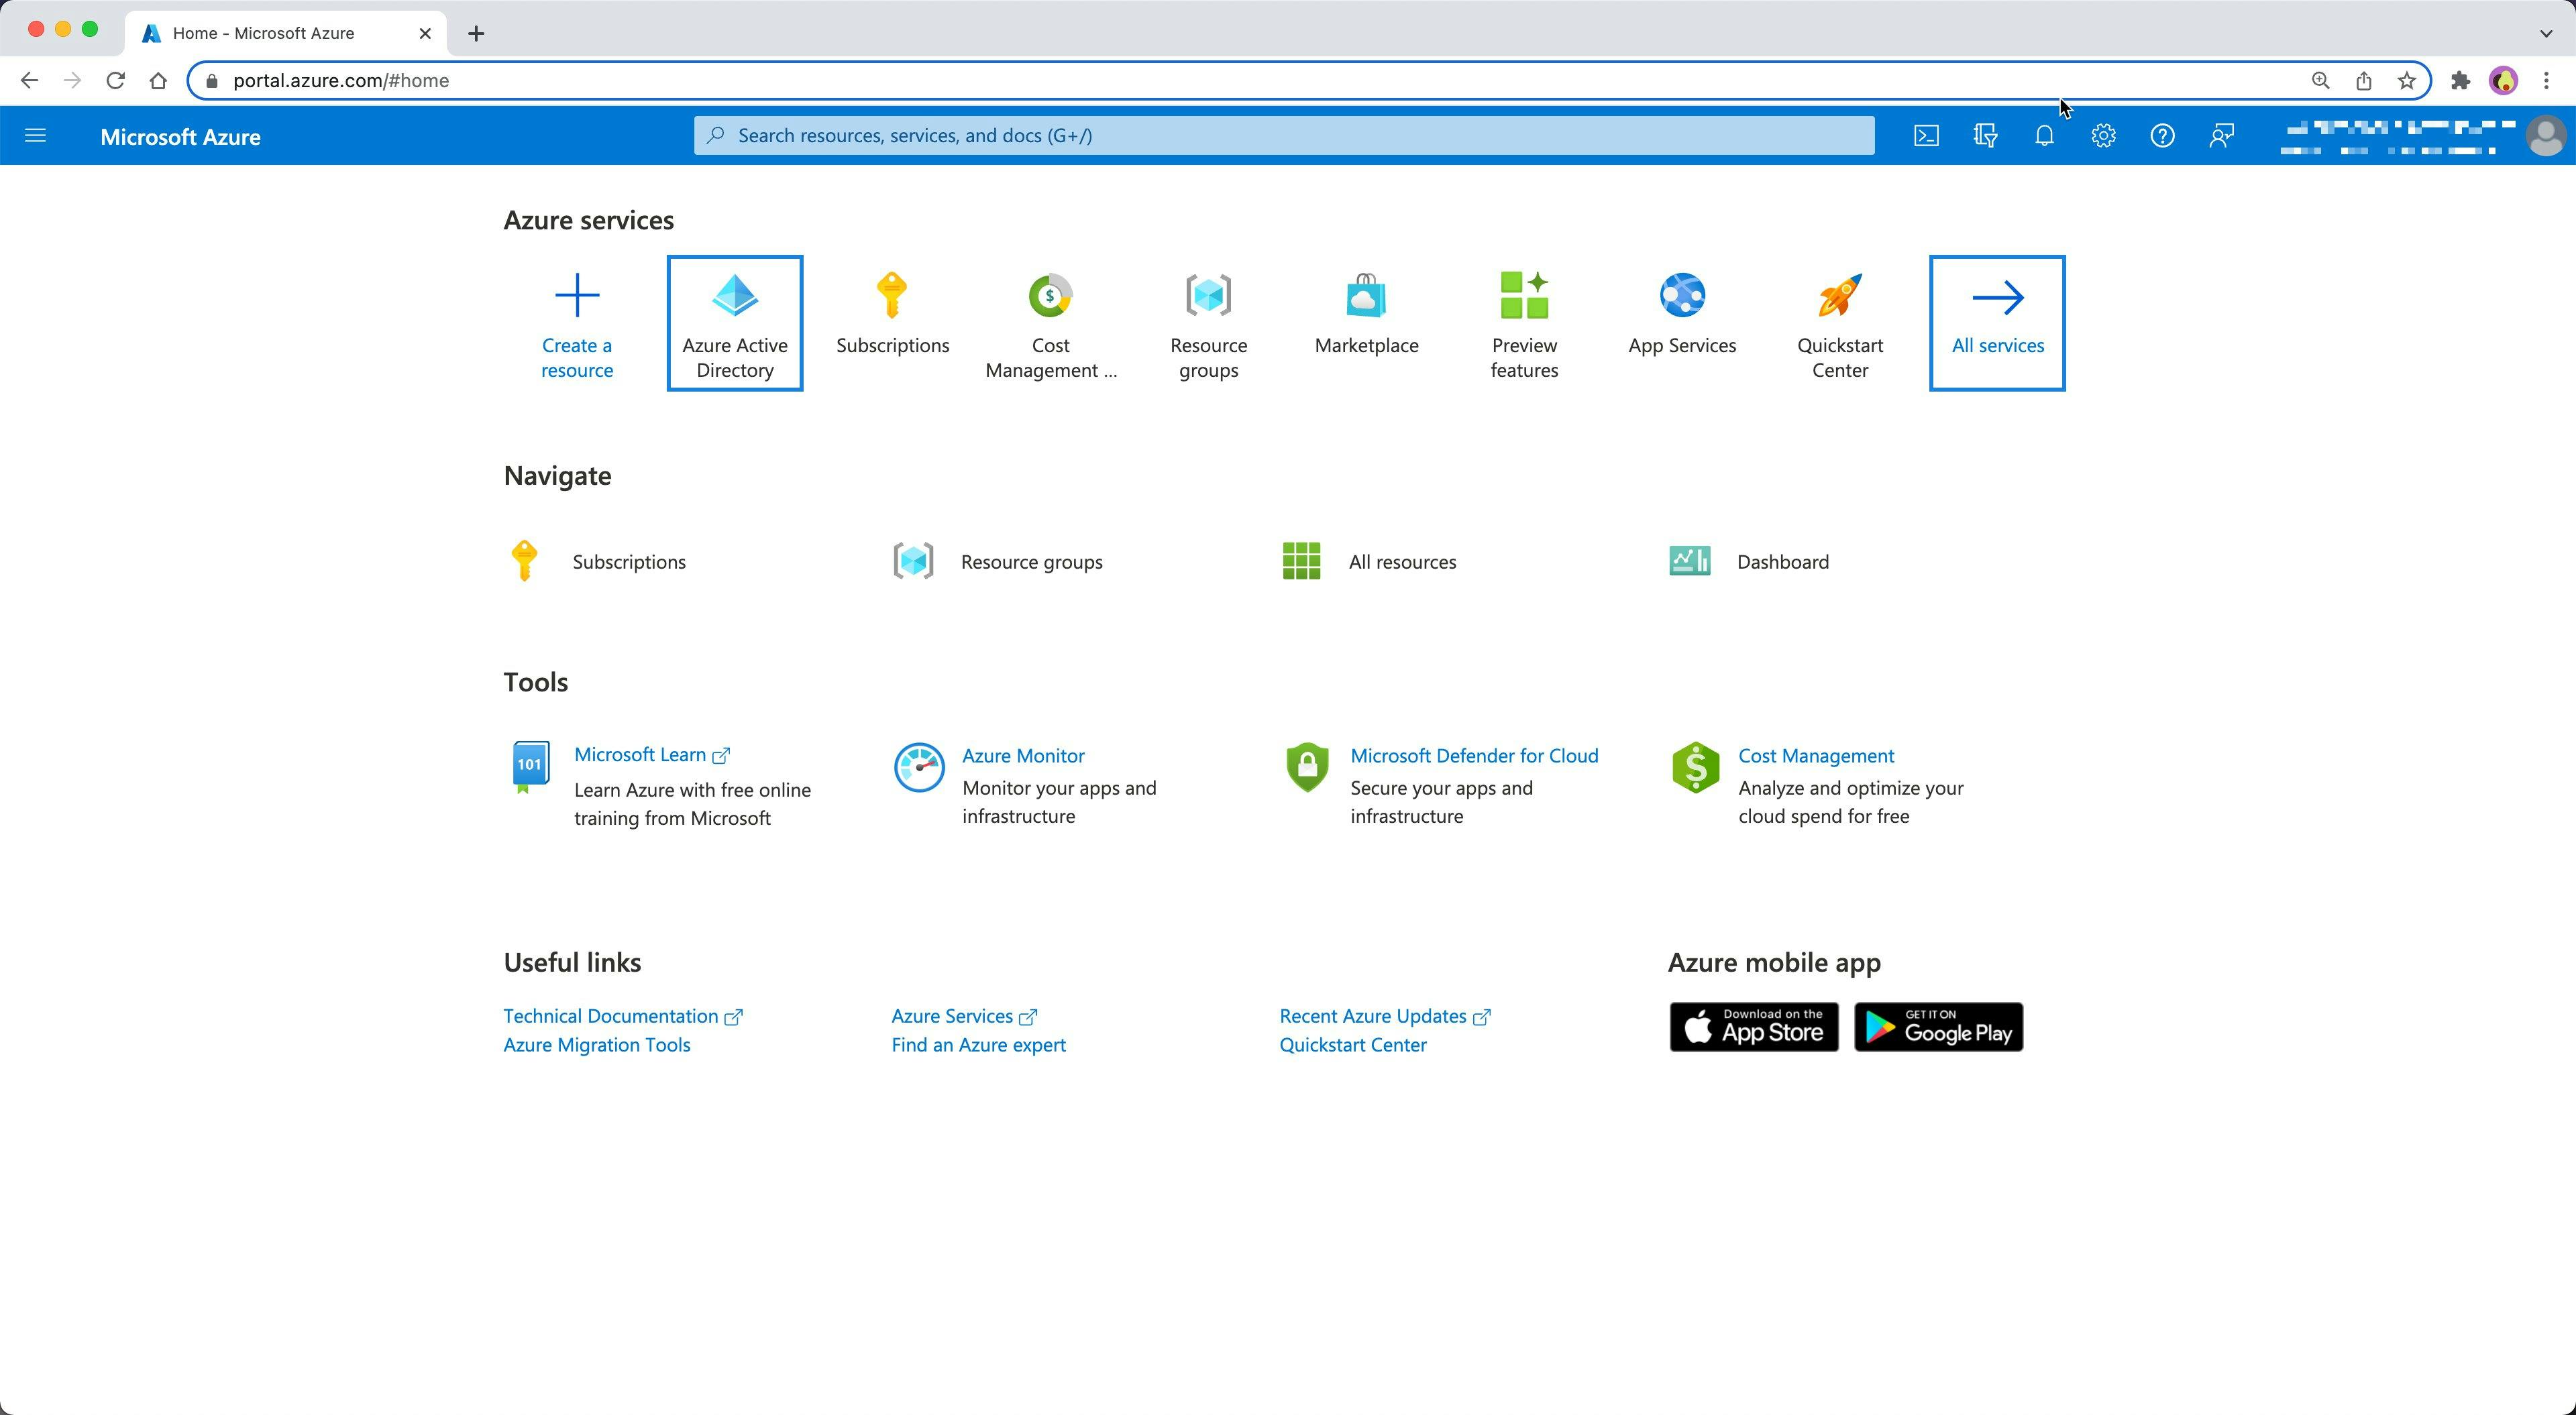 Azure AD Portal home page.